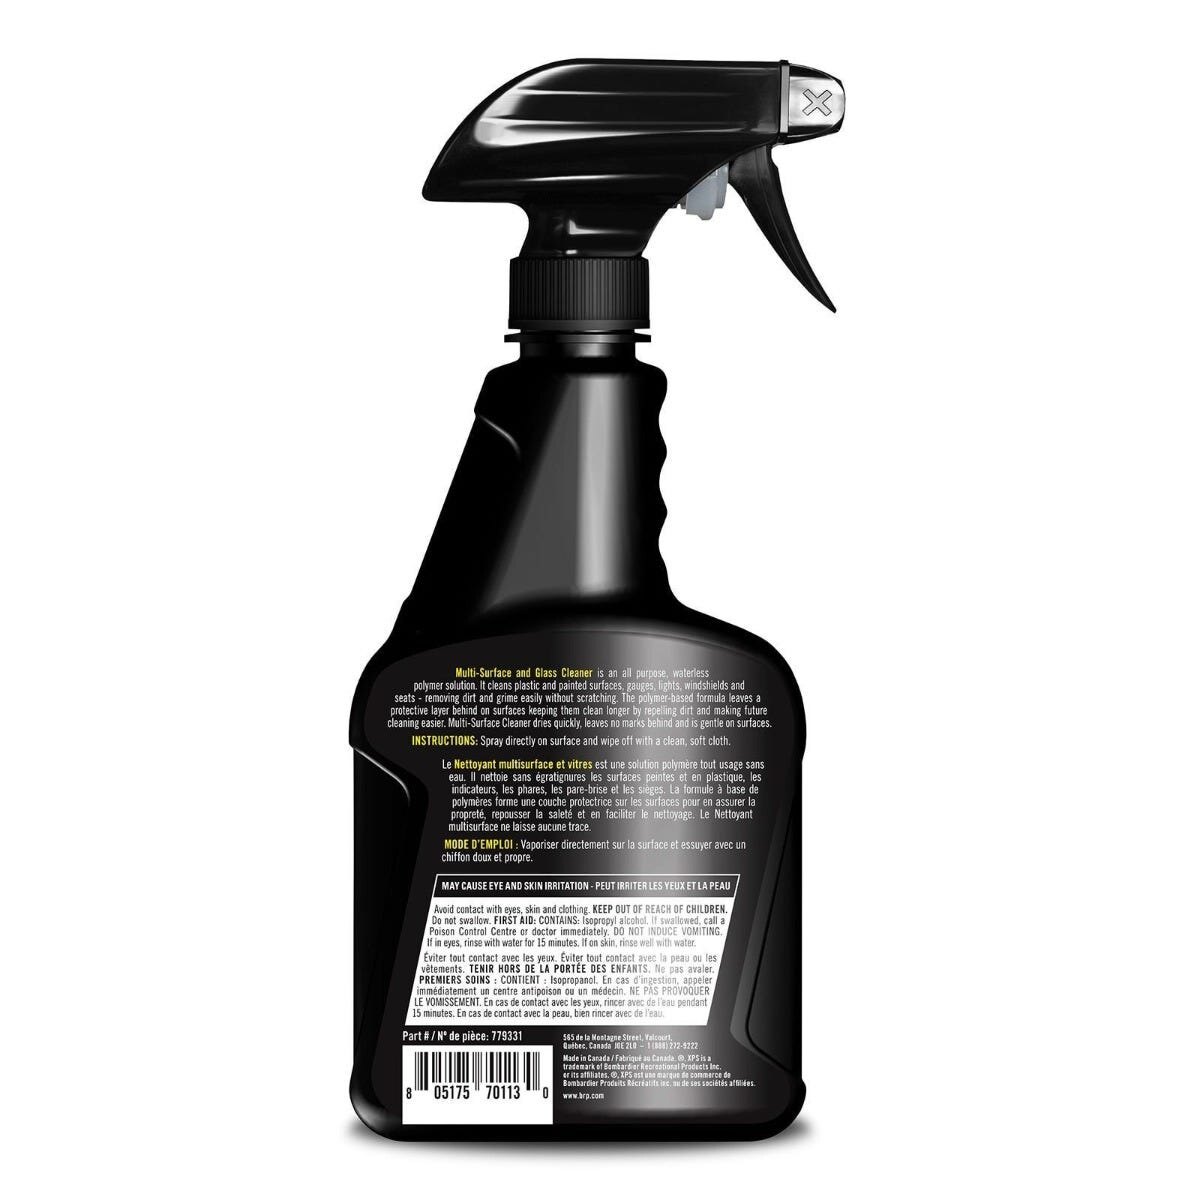 Multi surface And Glass Cleaner